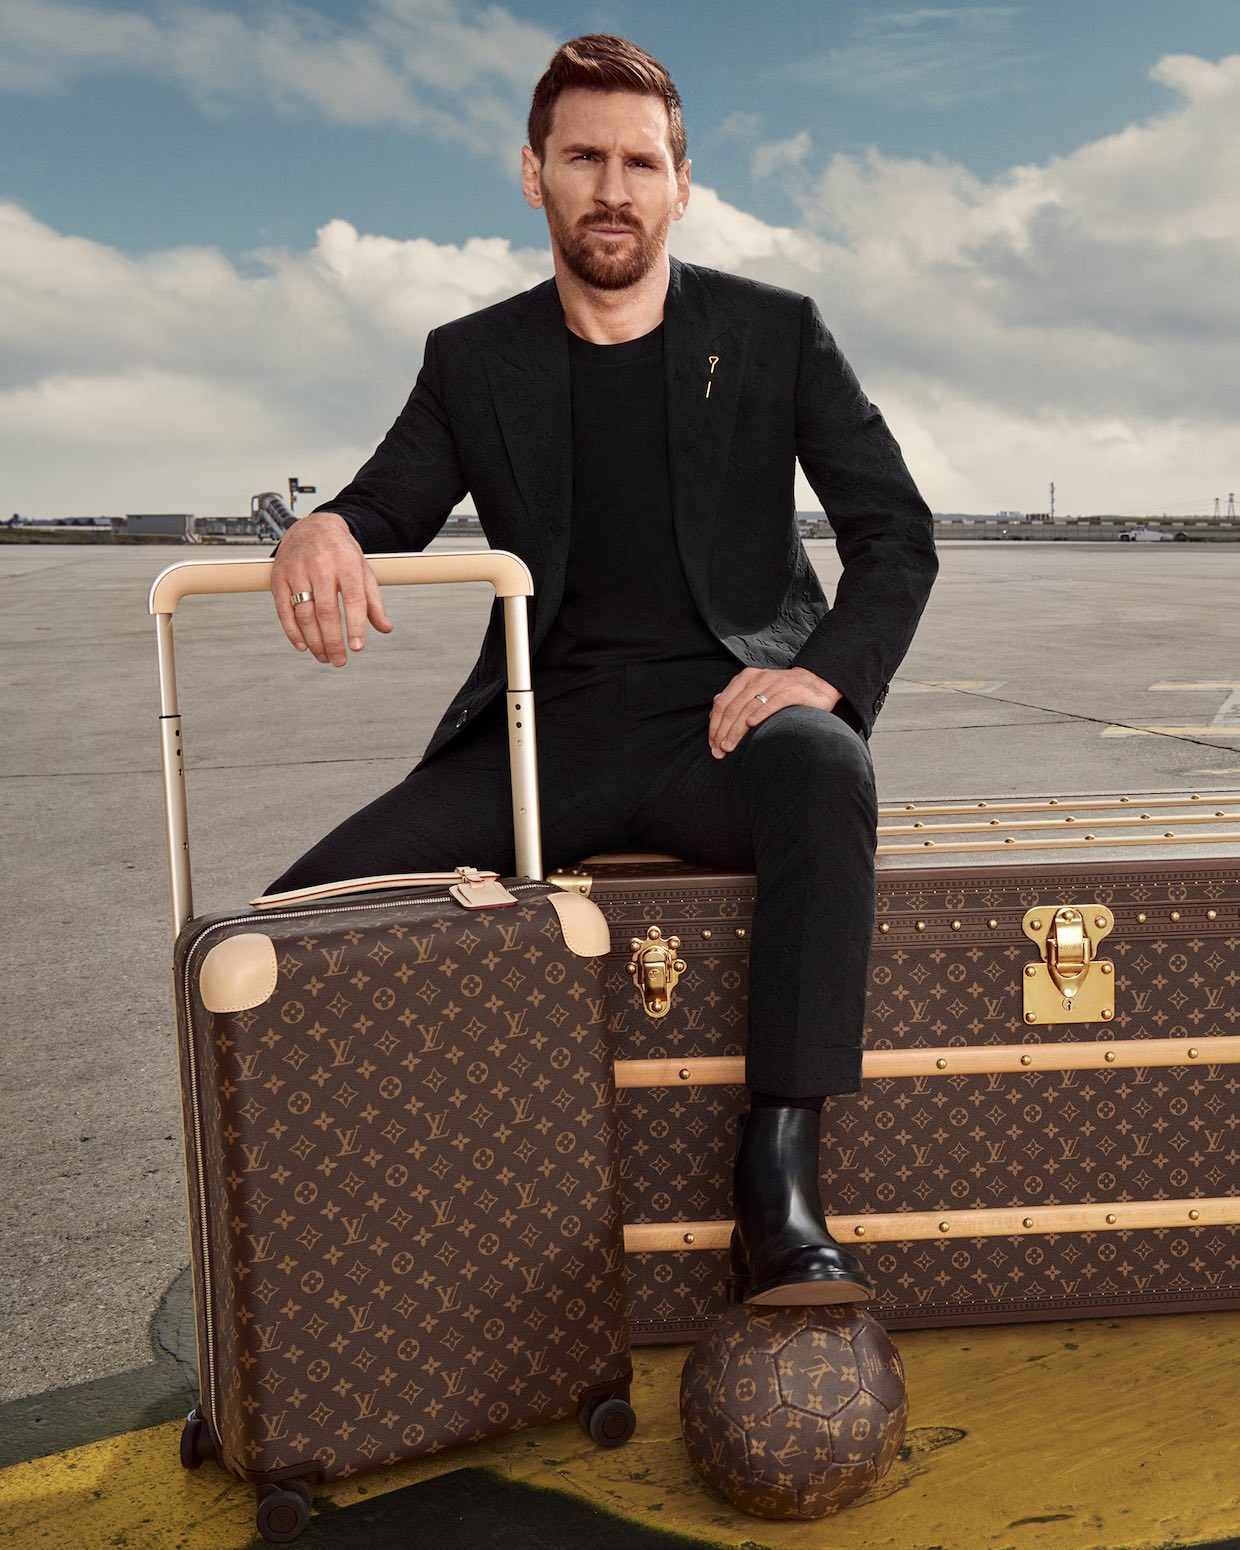 Footballer Lionel Messi is the new face of Louis Vuitton - FACT